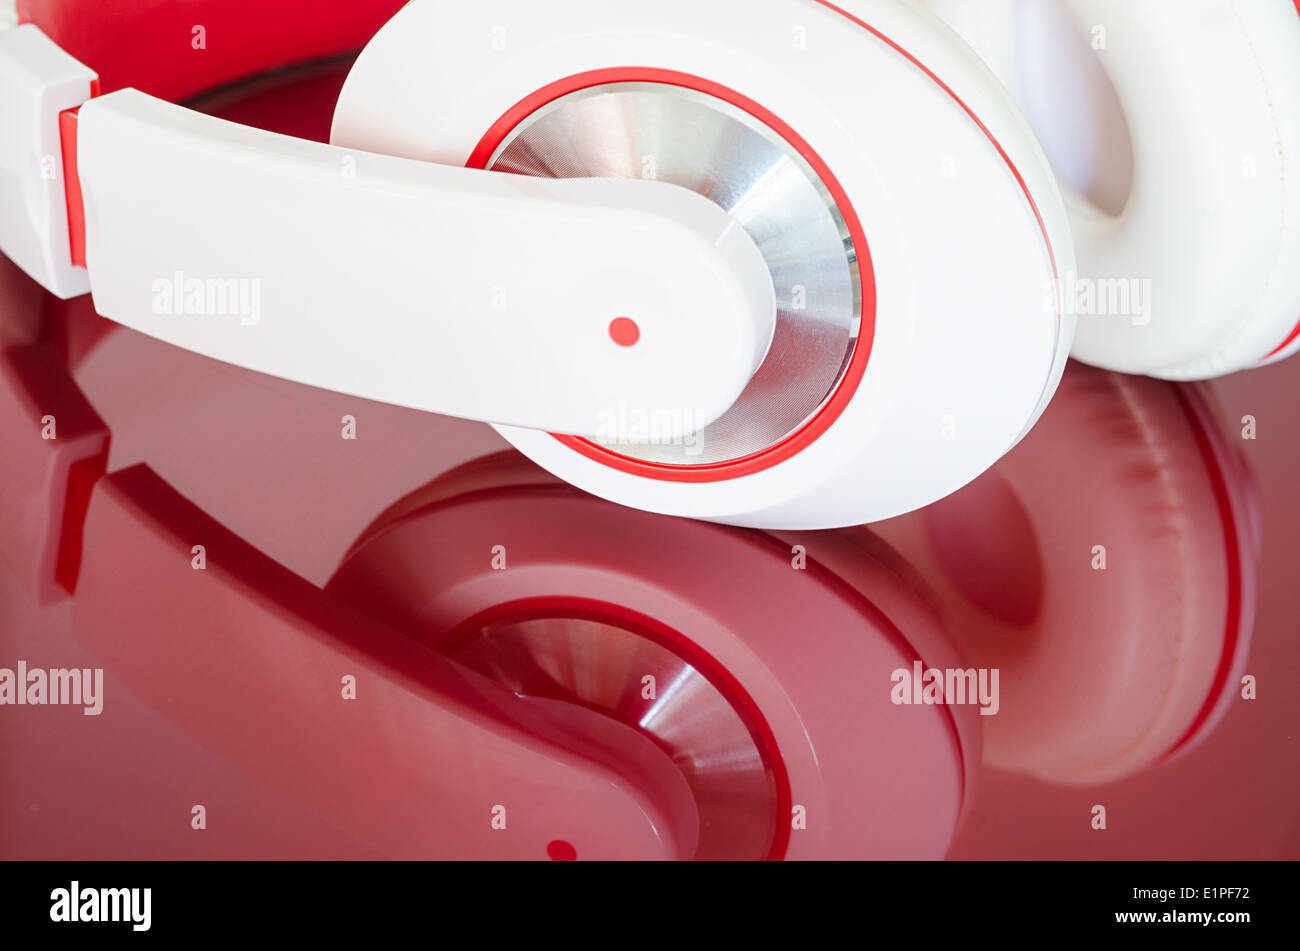 White red headphones on vinous clear polished mirrored surface Stock Photo